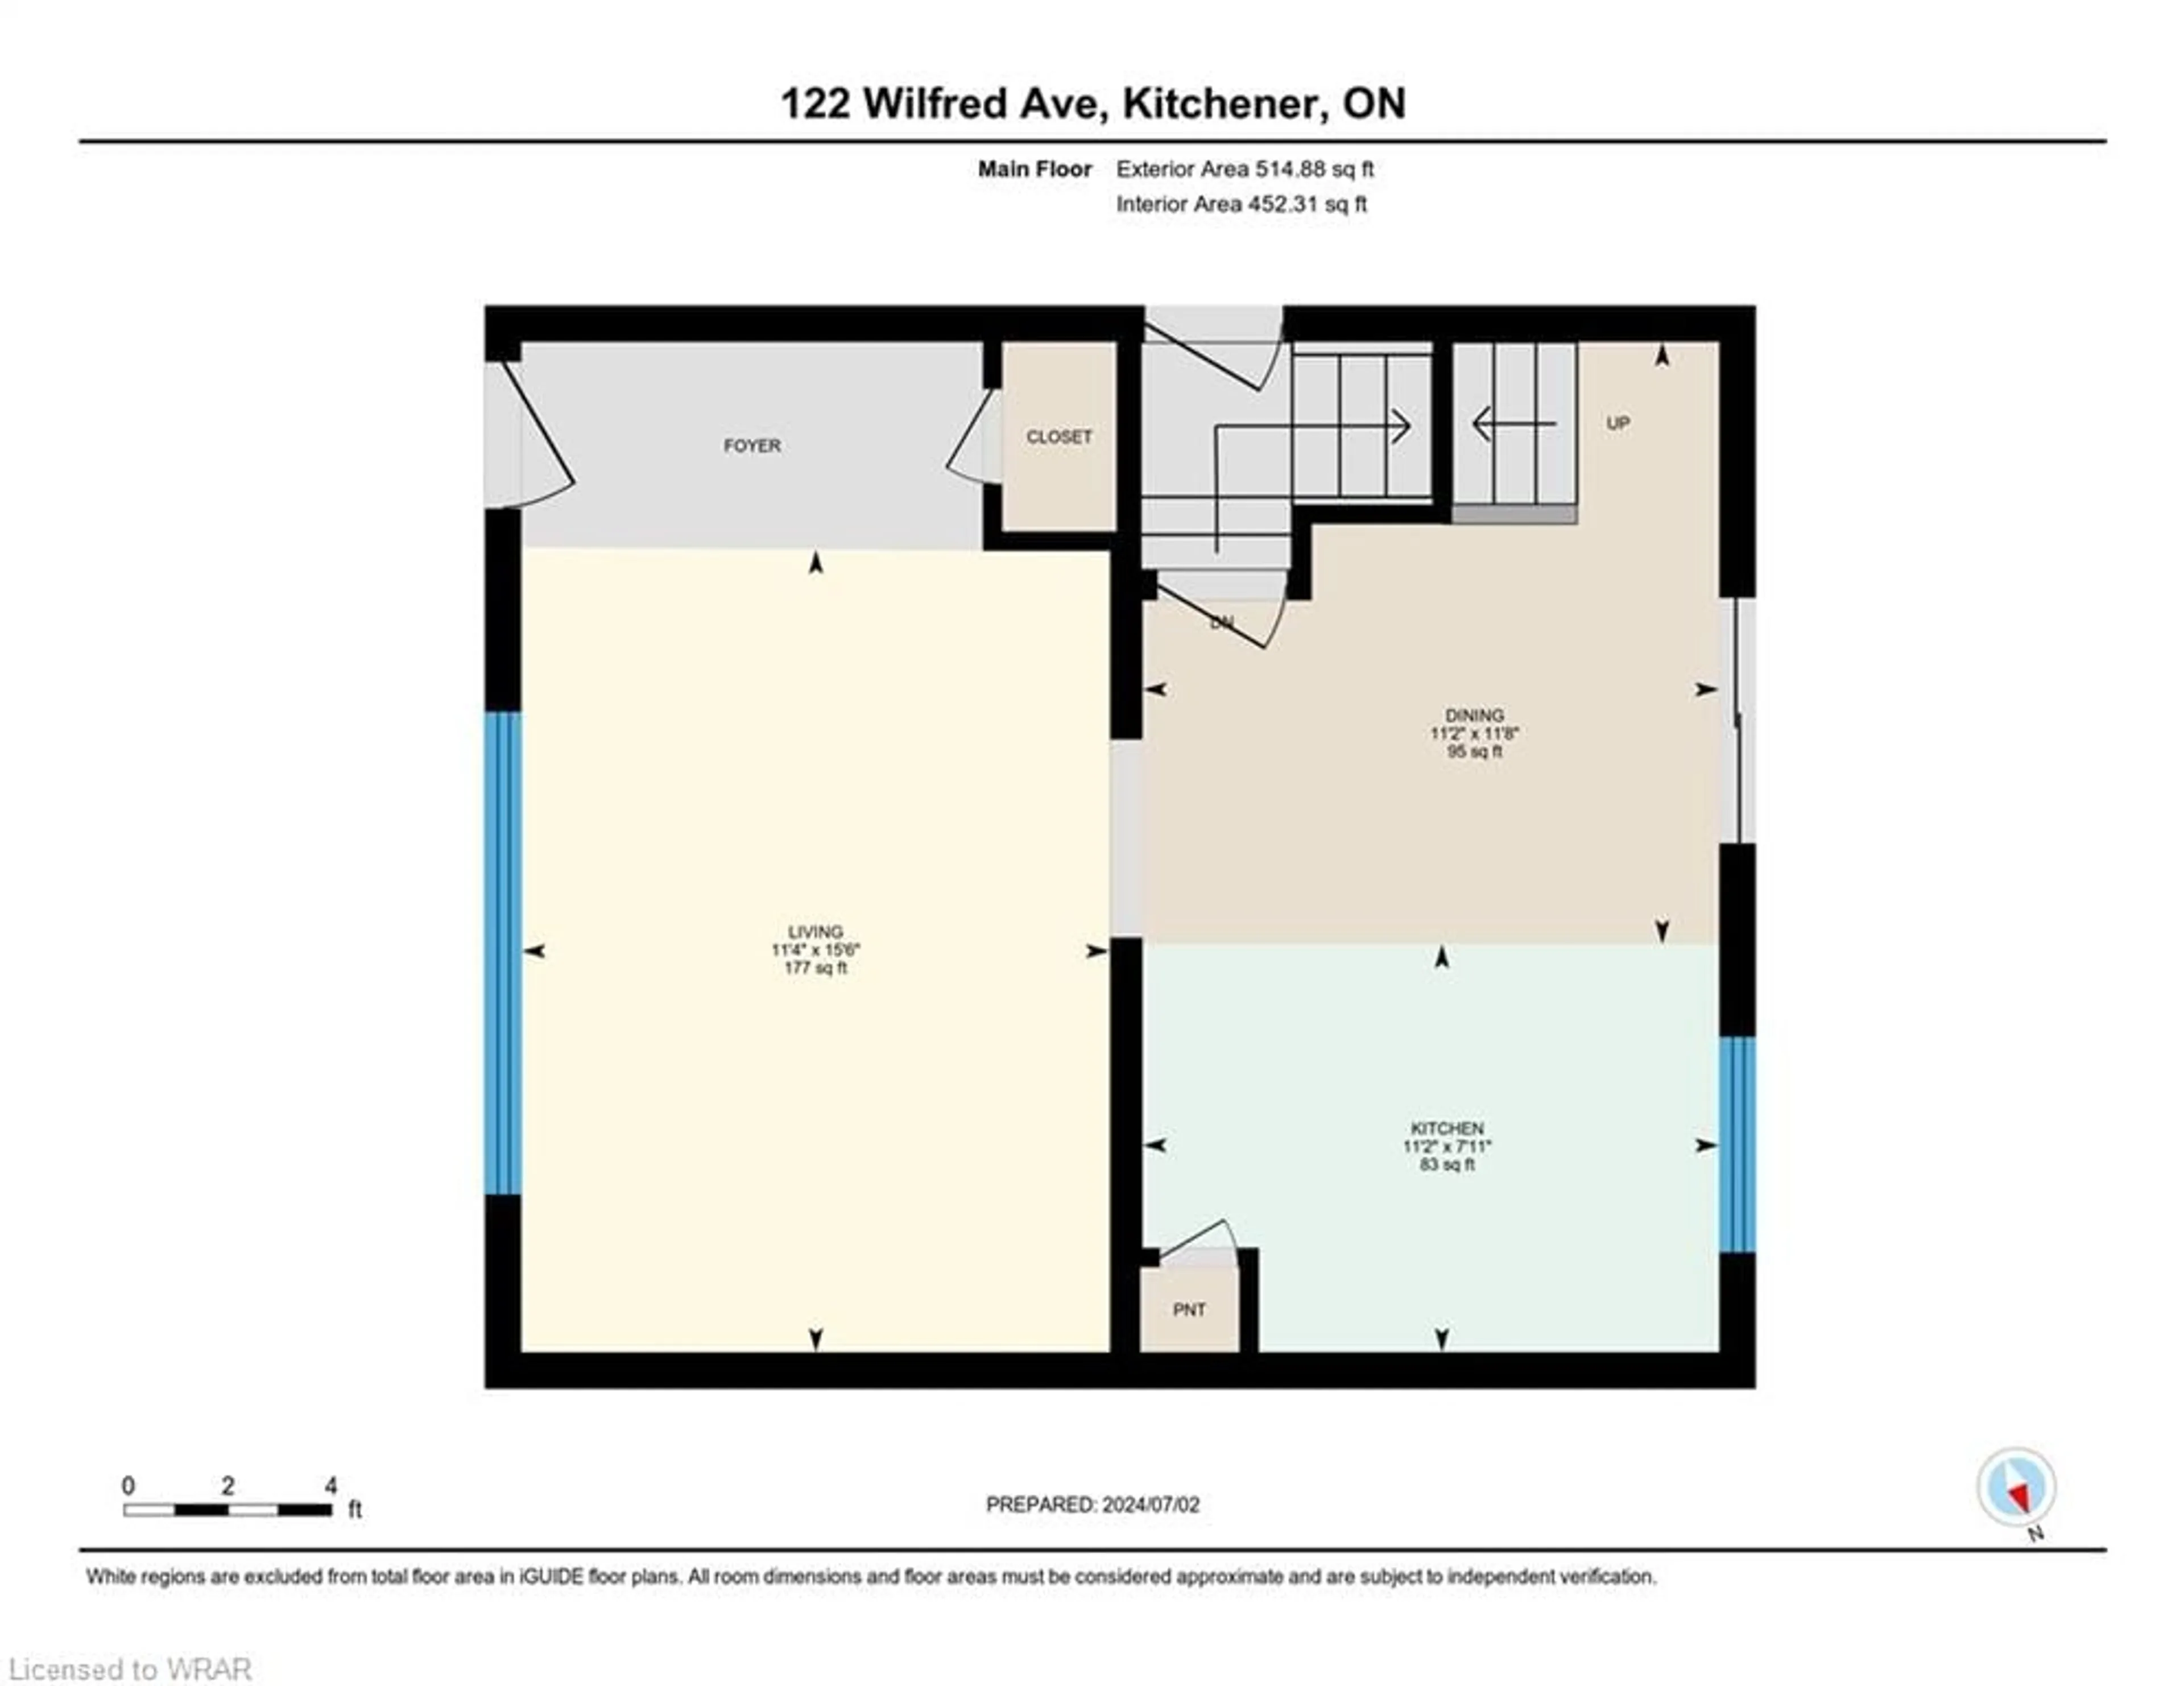 Floor plan for 122 Wilfred Ave, Kitchener Ontario N2A 1X1